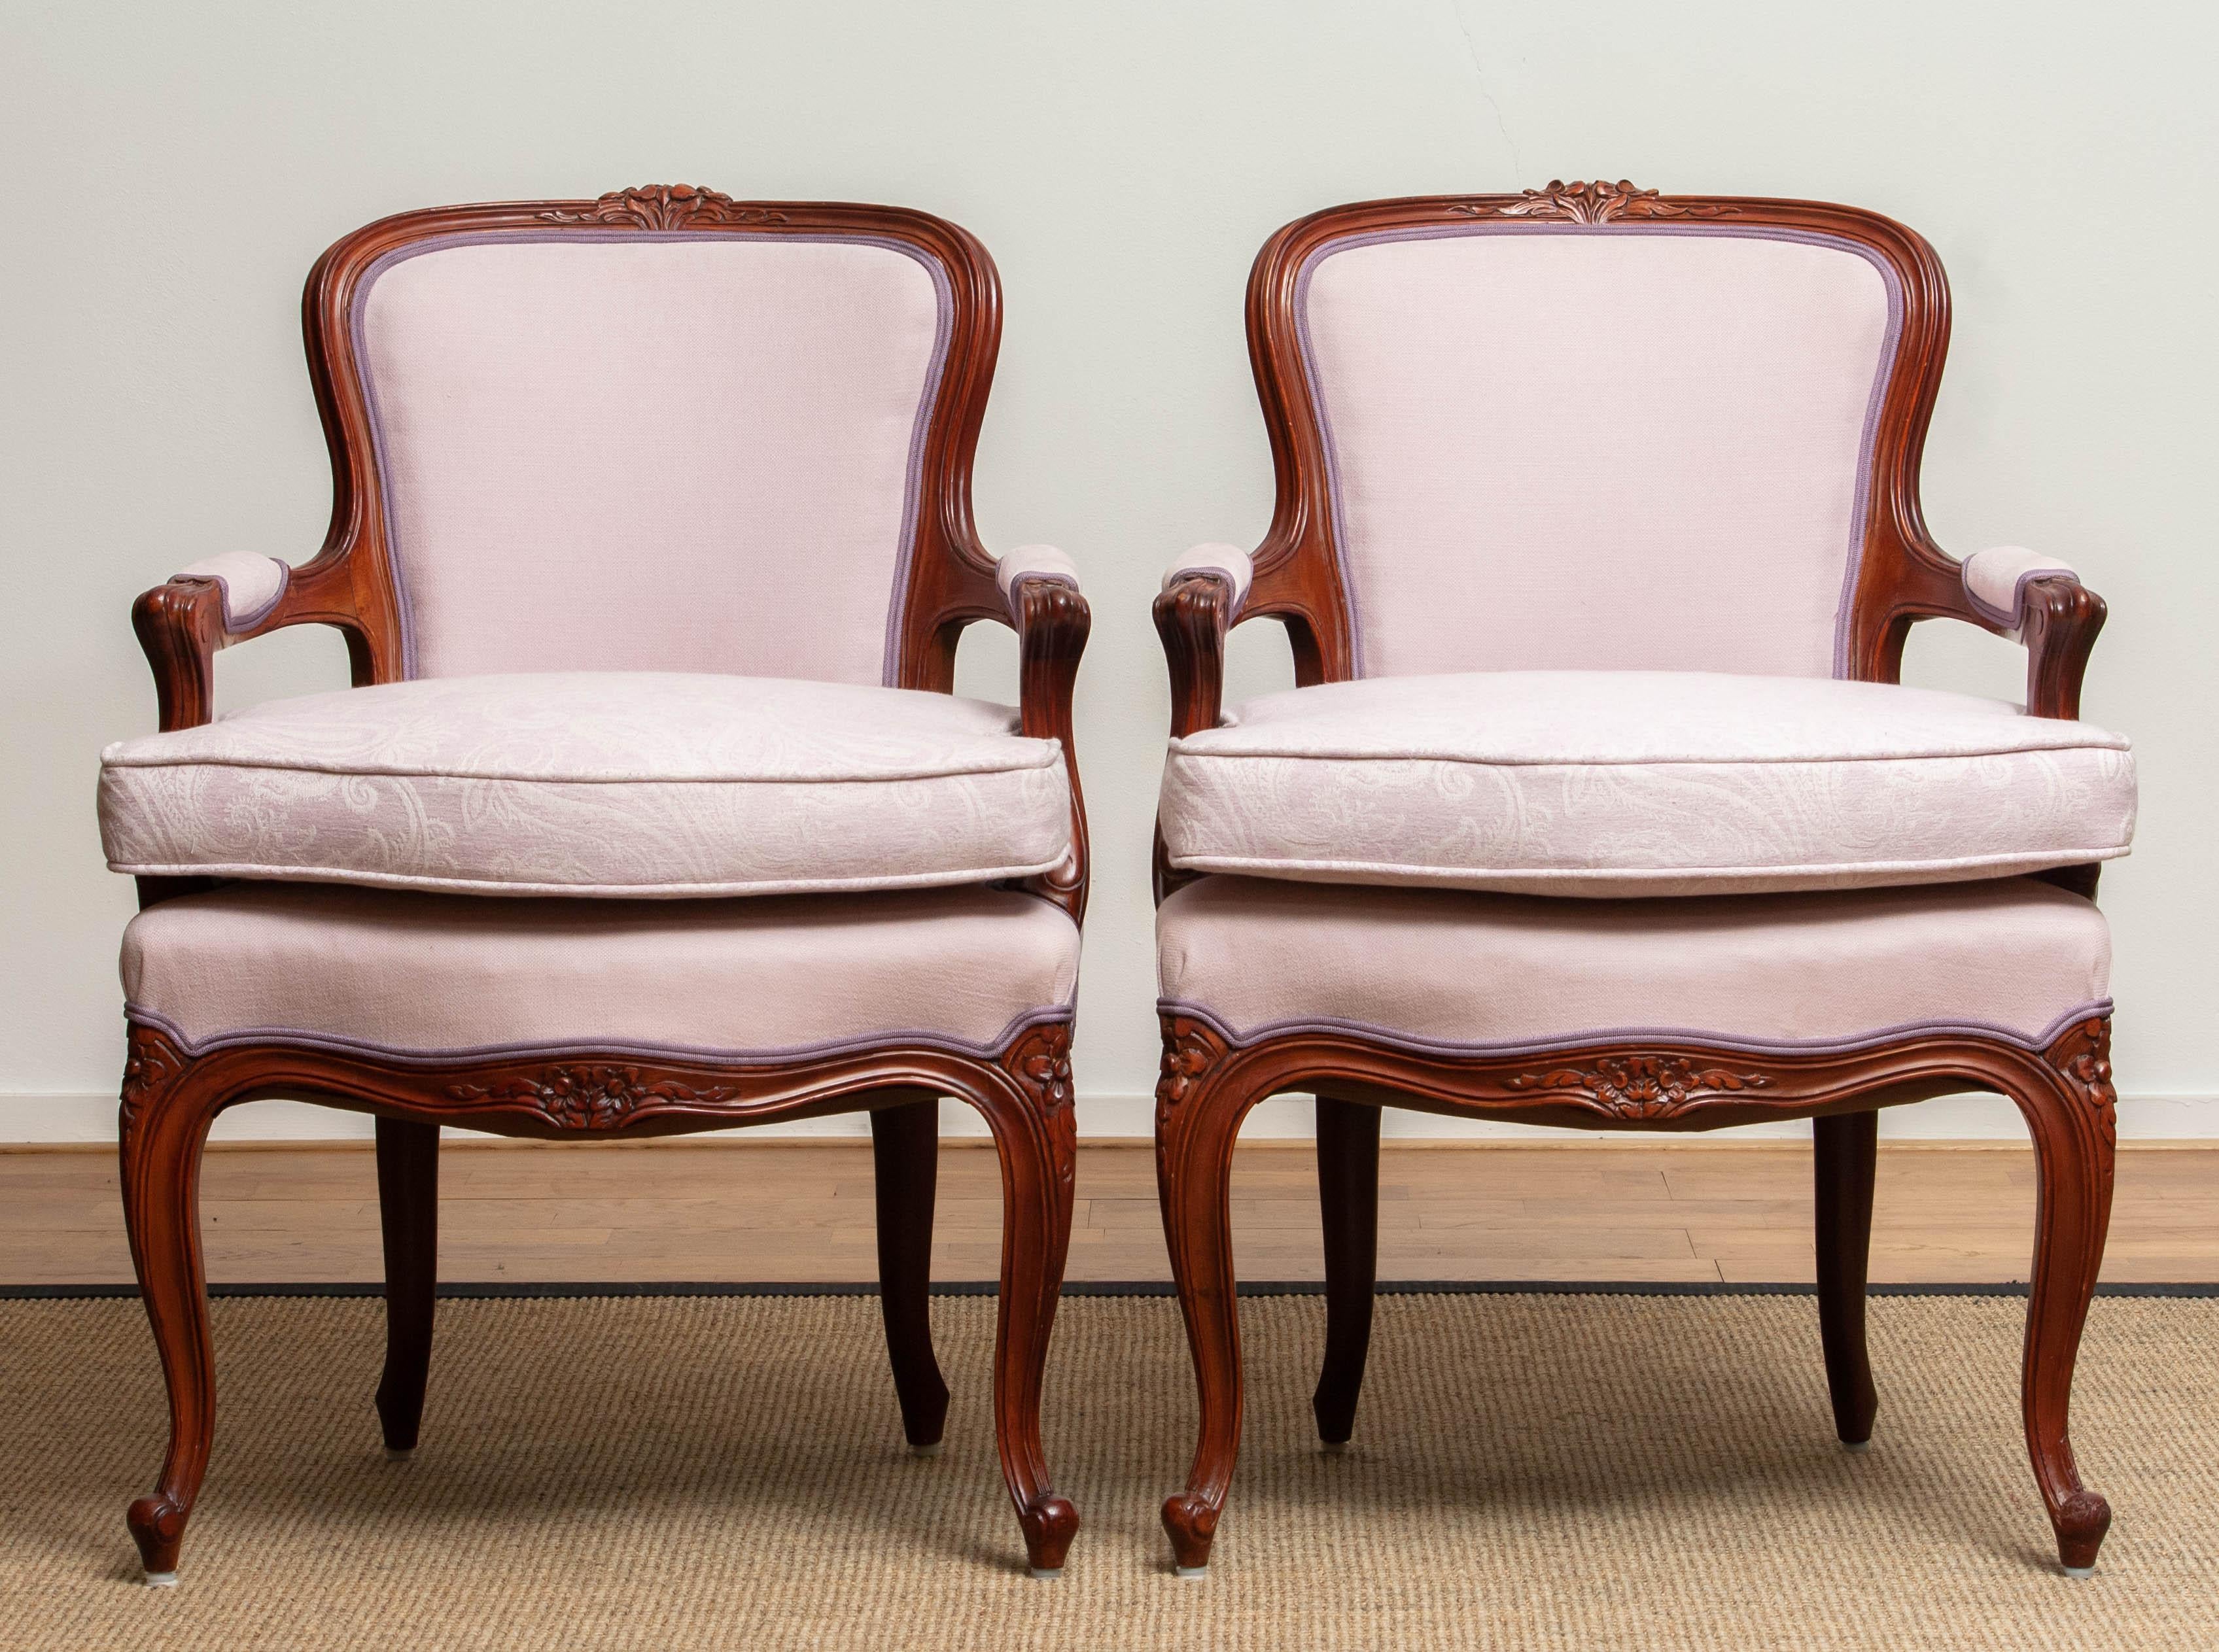 1950s Pair of Pink Swedish Rococo Bergères in the Shabby Chic Technique Chairs F 7